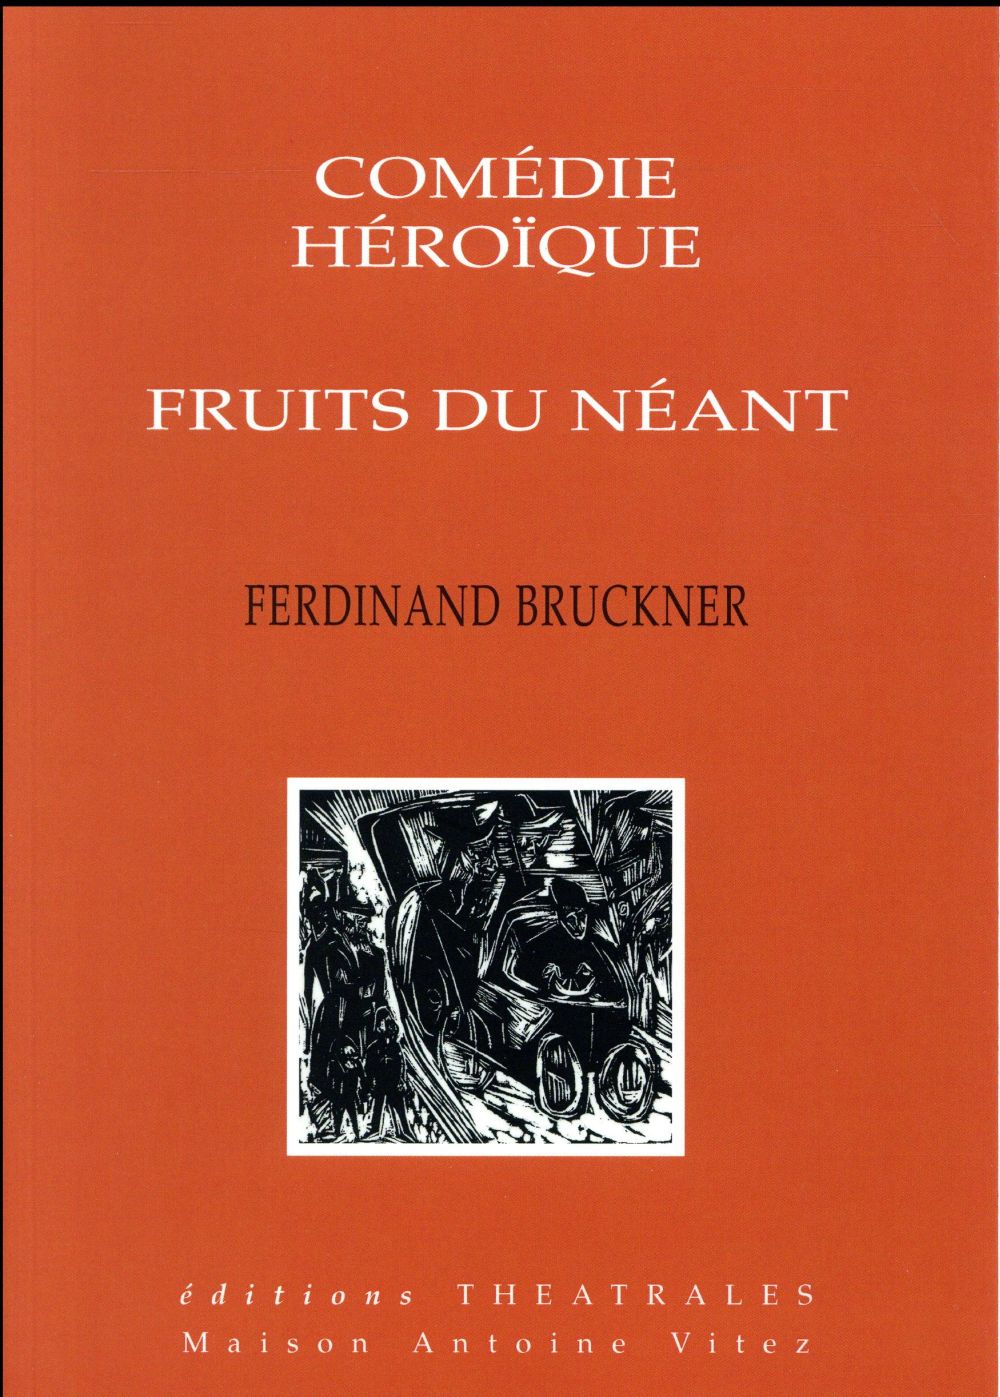 COMEDIE HEROIQUE - FRUITS DU NEANT